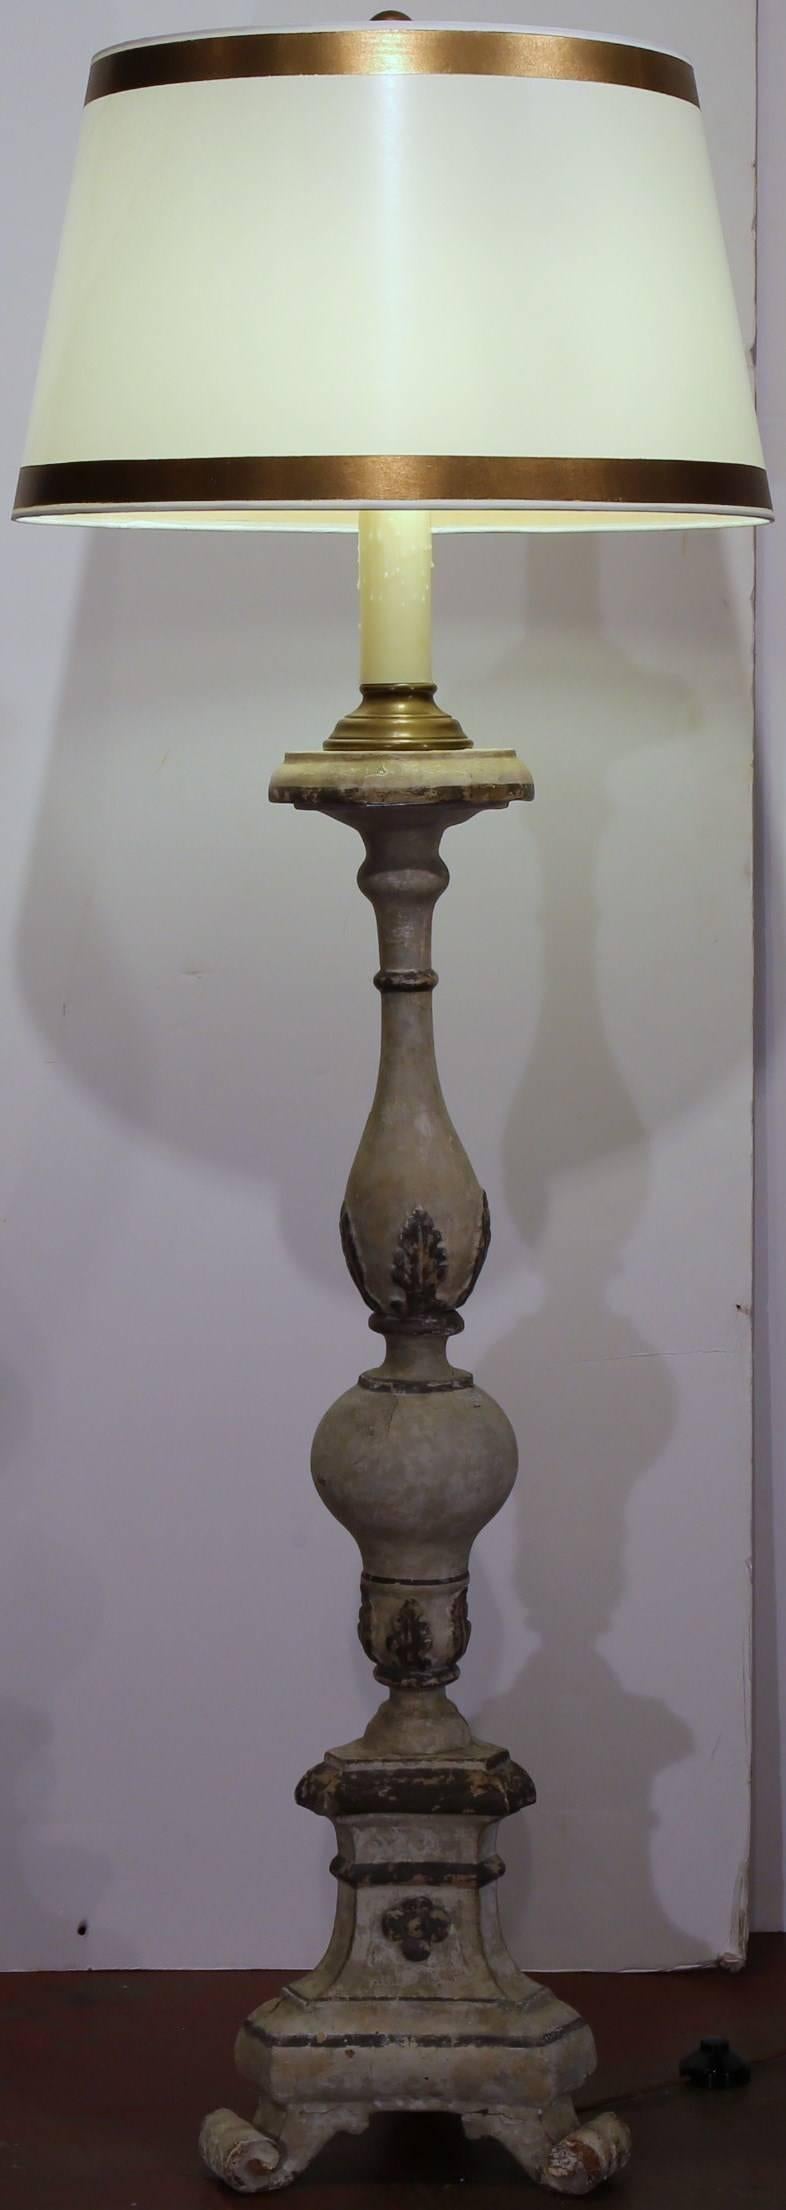 This pair of tall, antique wooden candlesticks from Italy, were converted into lamps, circa 1790. Each of the 18th century altar sticks has been rewired with custom wax candle and is sold with a custom white and gold shade. The base of the lamp has